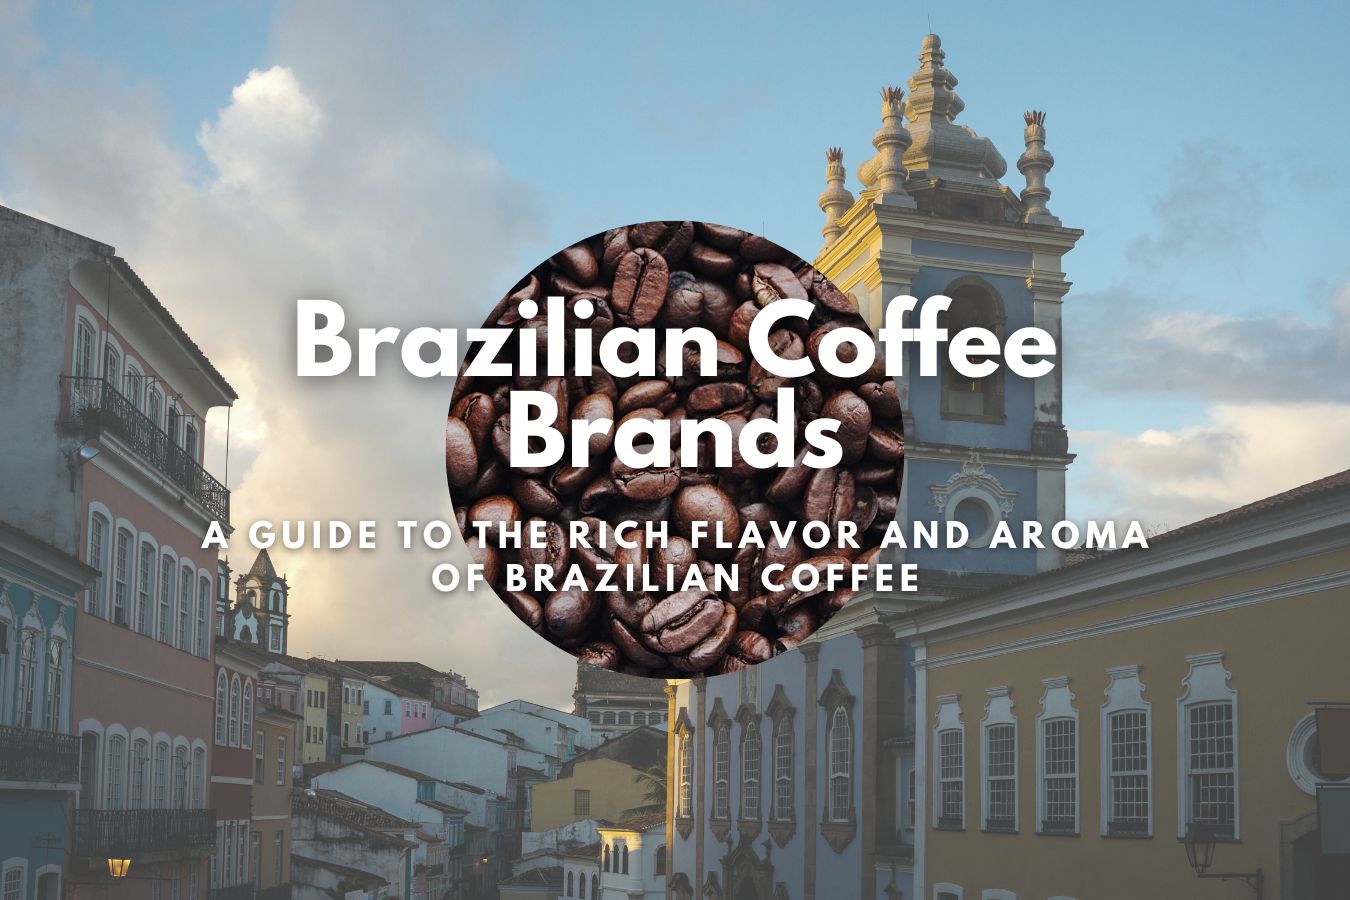 Savor the Best Brazilian Coffee Brands - A Guide to the Rich Flavor and Aroma of Brazilian Coffee